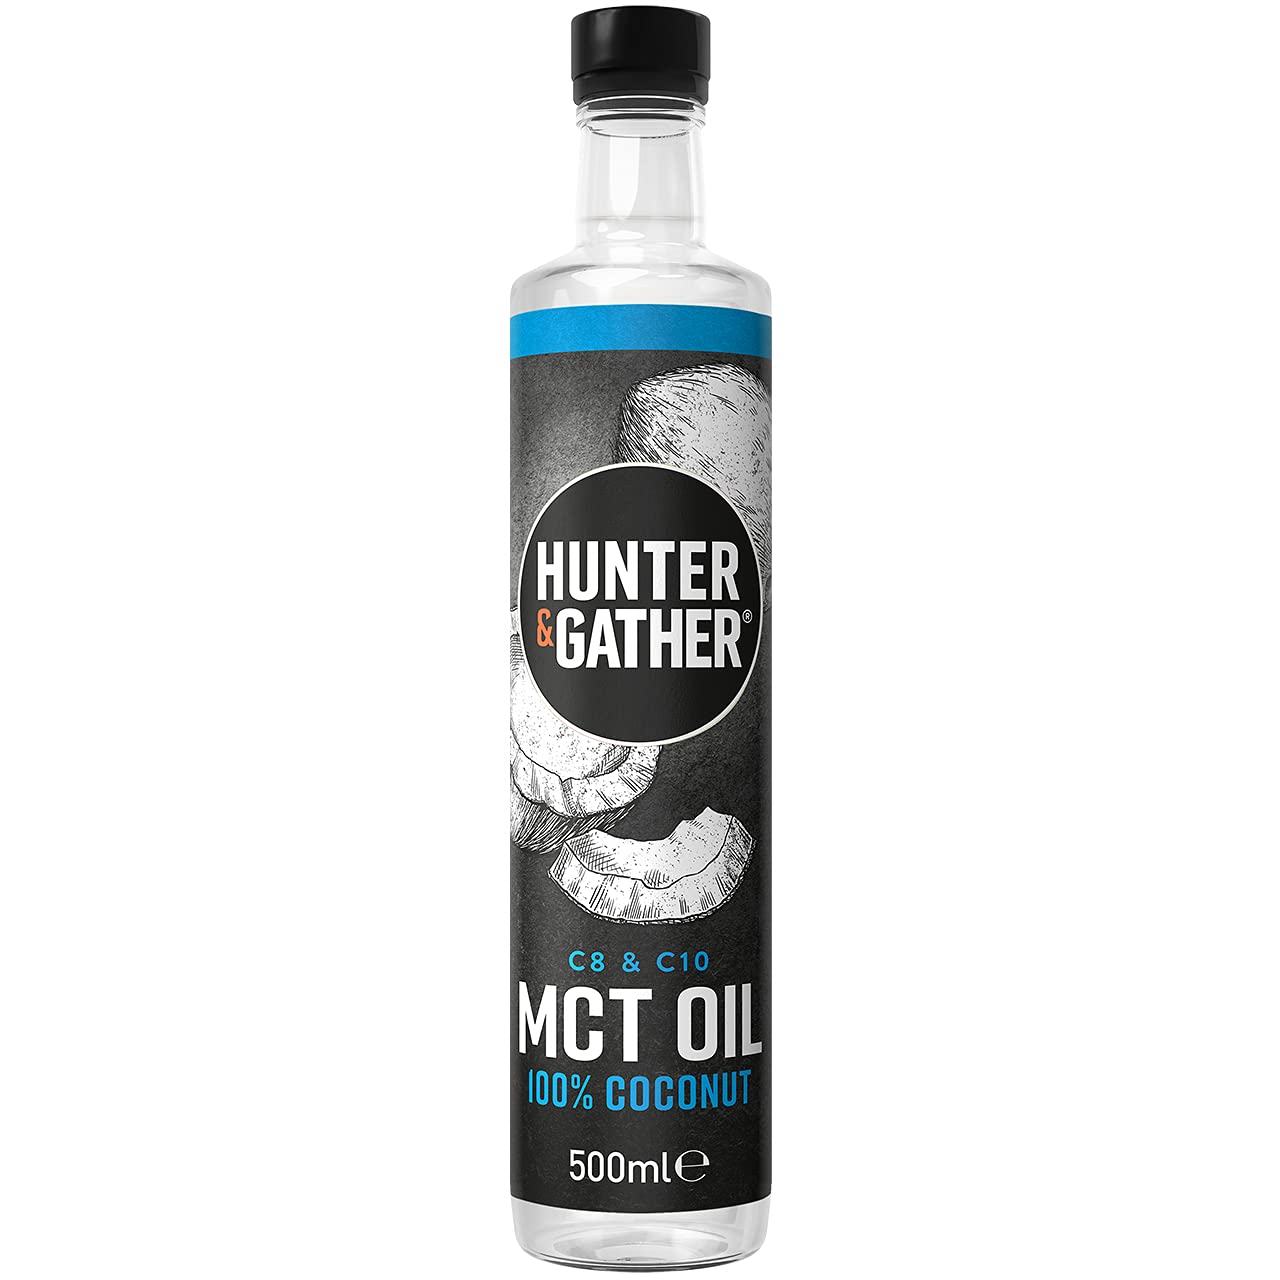 Hunter & Gather Premium C8 & C10 MCT Oil (500ml) | Supports Keto & (IF) Fasting | Used in Bulletproof & Fatty Coffee | Seed & Vegetable Oil Glycerol Free